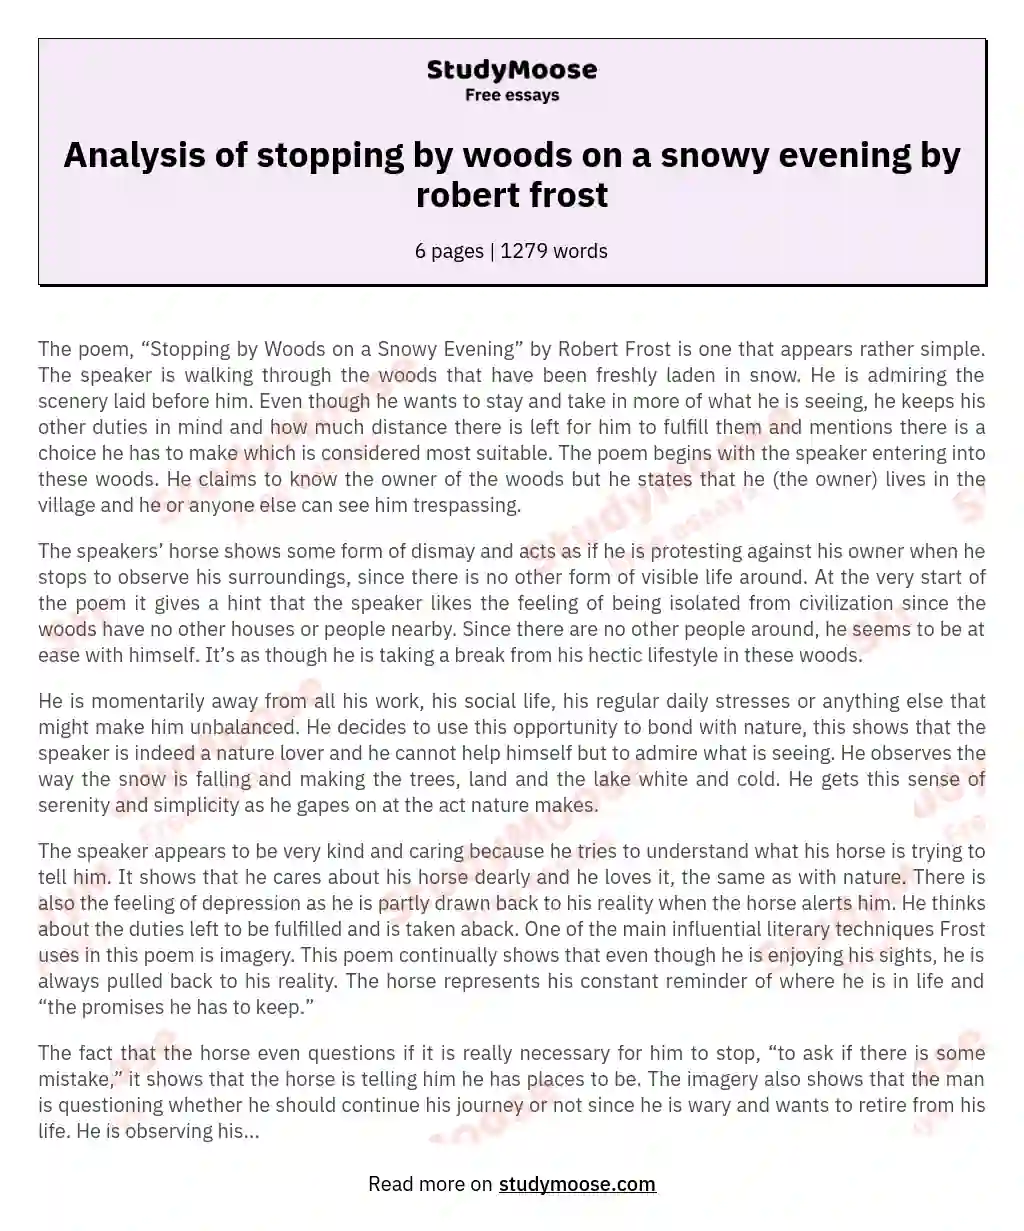 Analysis of stopping by woods on a snowy evening by robert frost essay